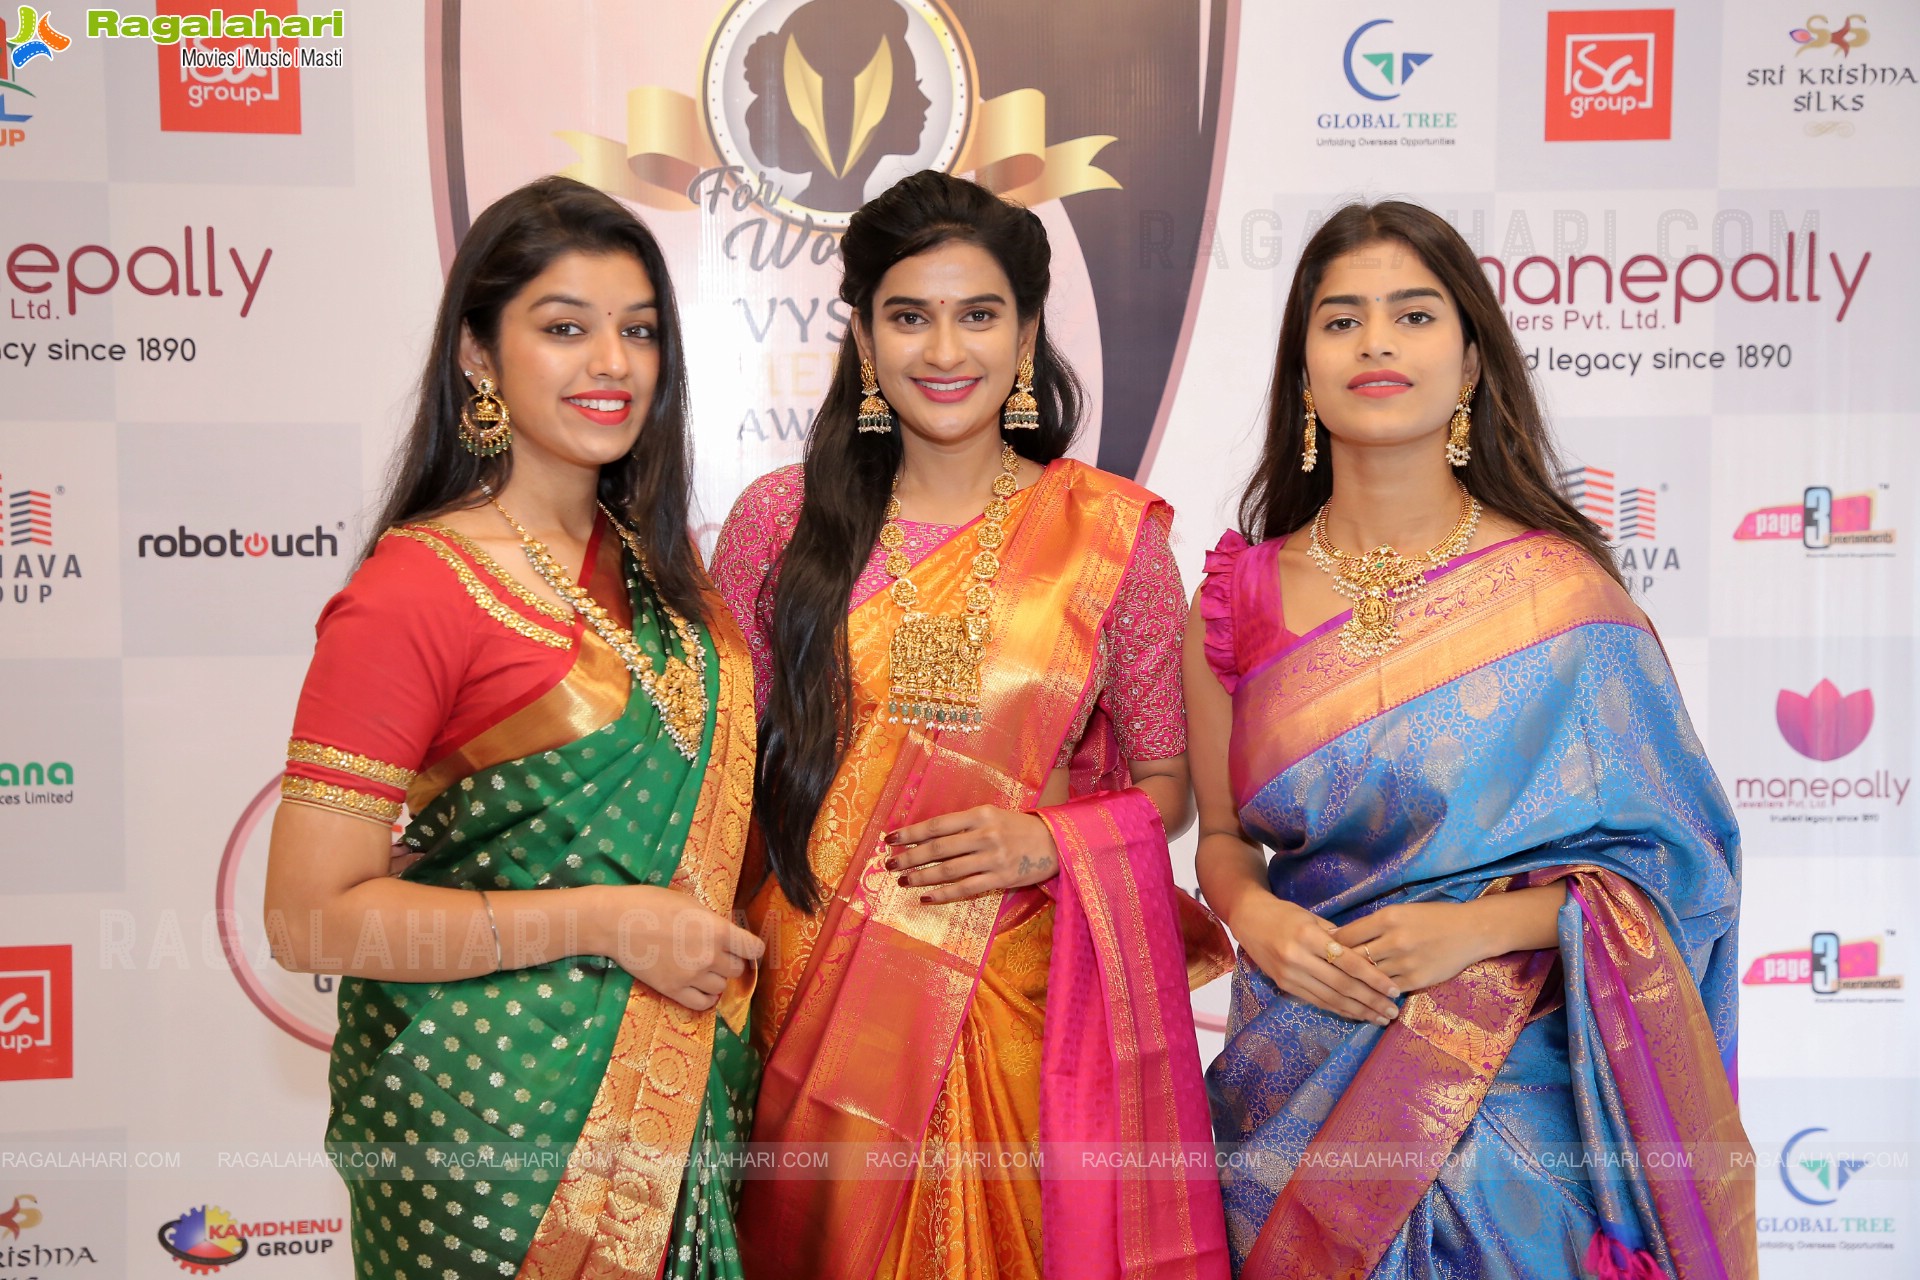 Manepally Jewellers Unveils Its Exclusive Jewellery Collection